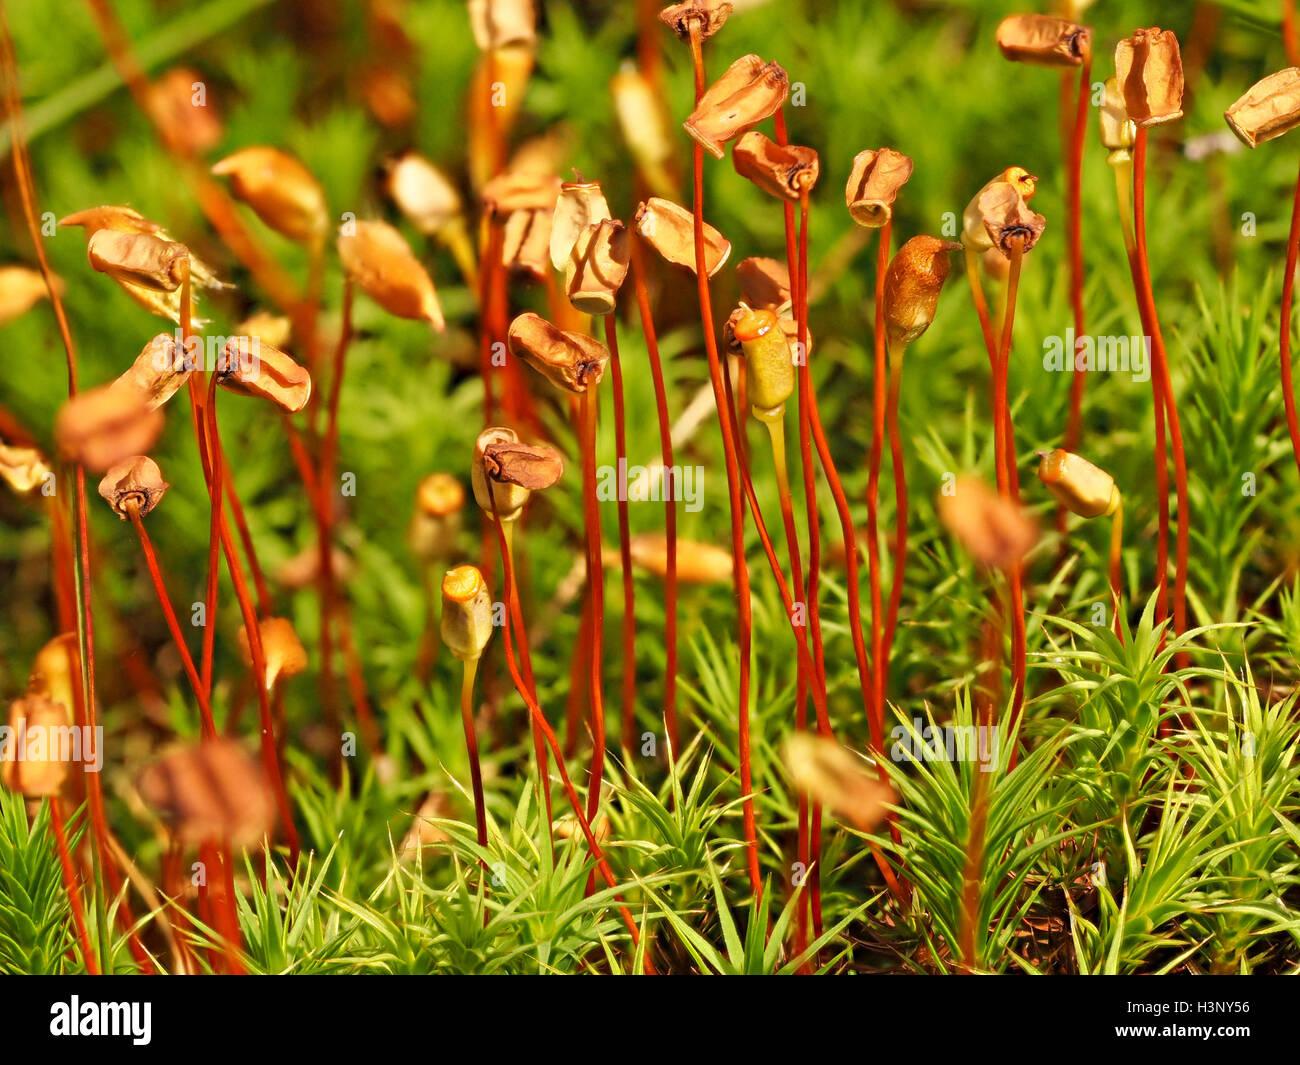 common-haircap-moss-polytrichum-commune-with-mature-seedpods-on-reddish-H3NY56.jpg